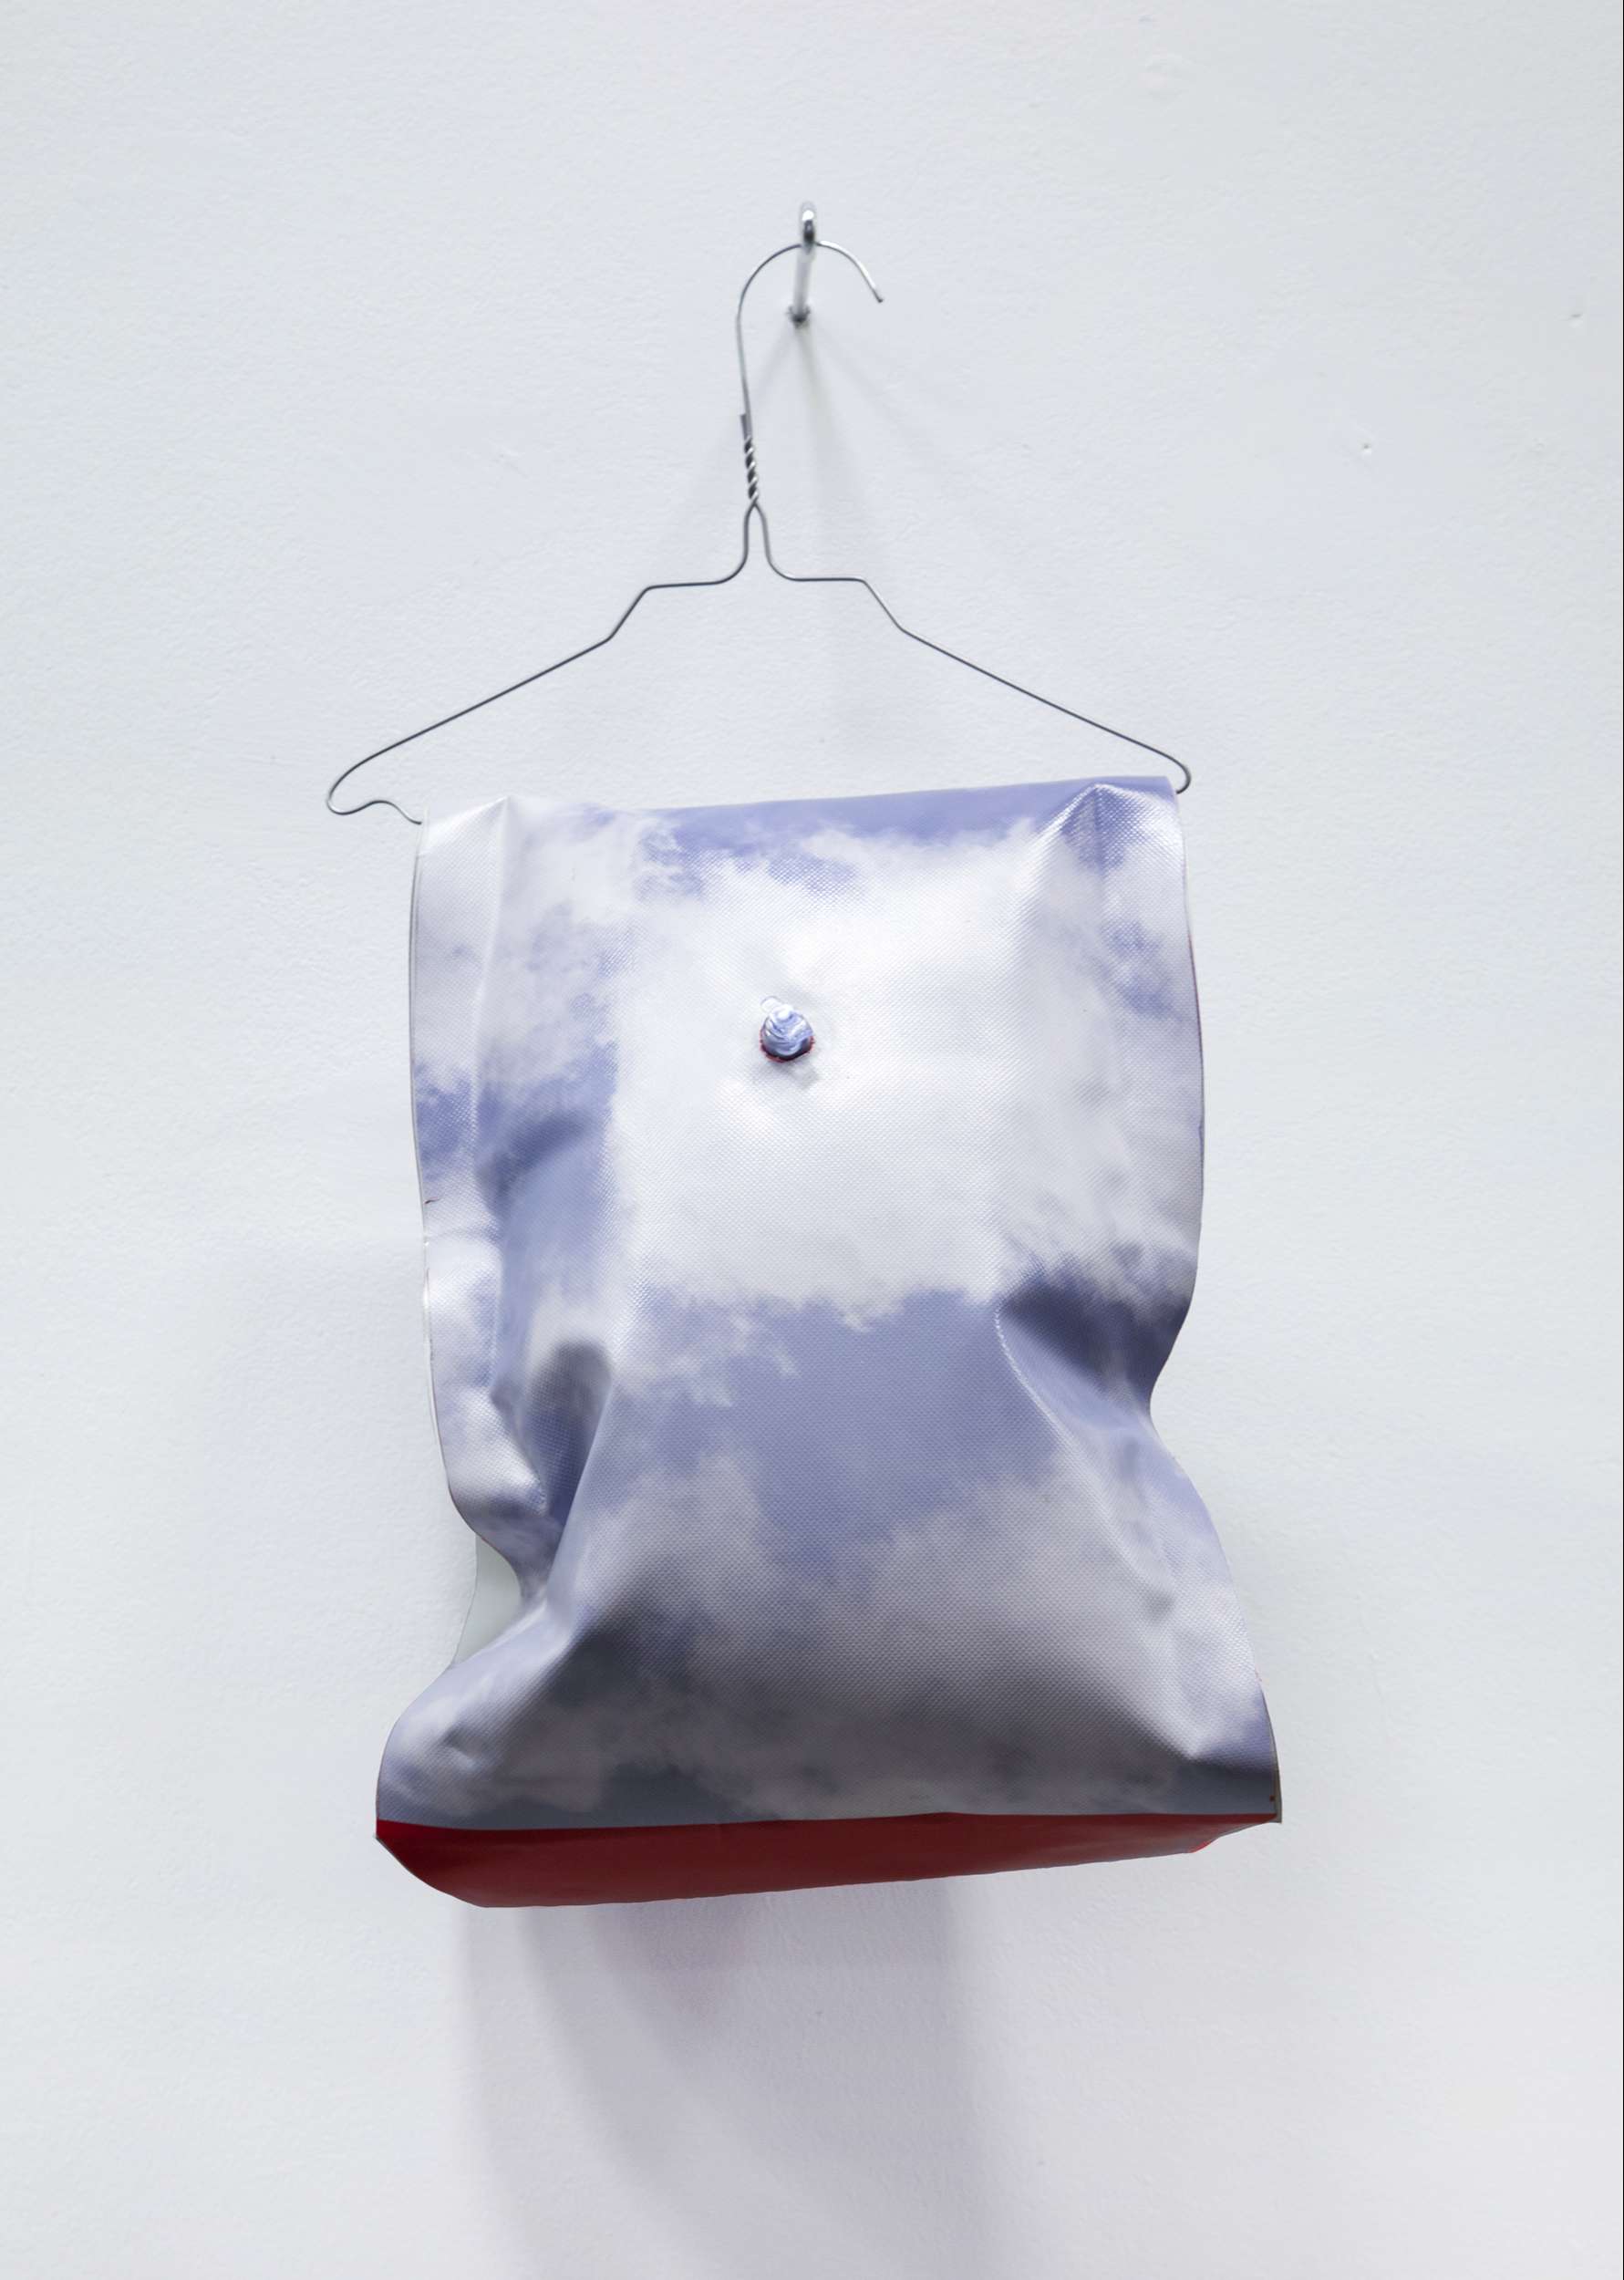 Medusa : floating body #3, floating wings, printed PVC, 30x20x15cm, installation view, 2020